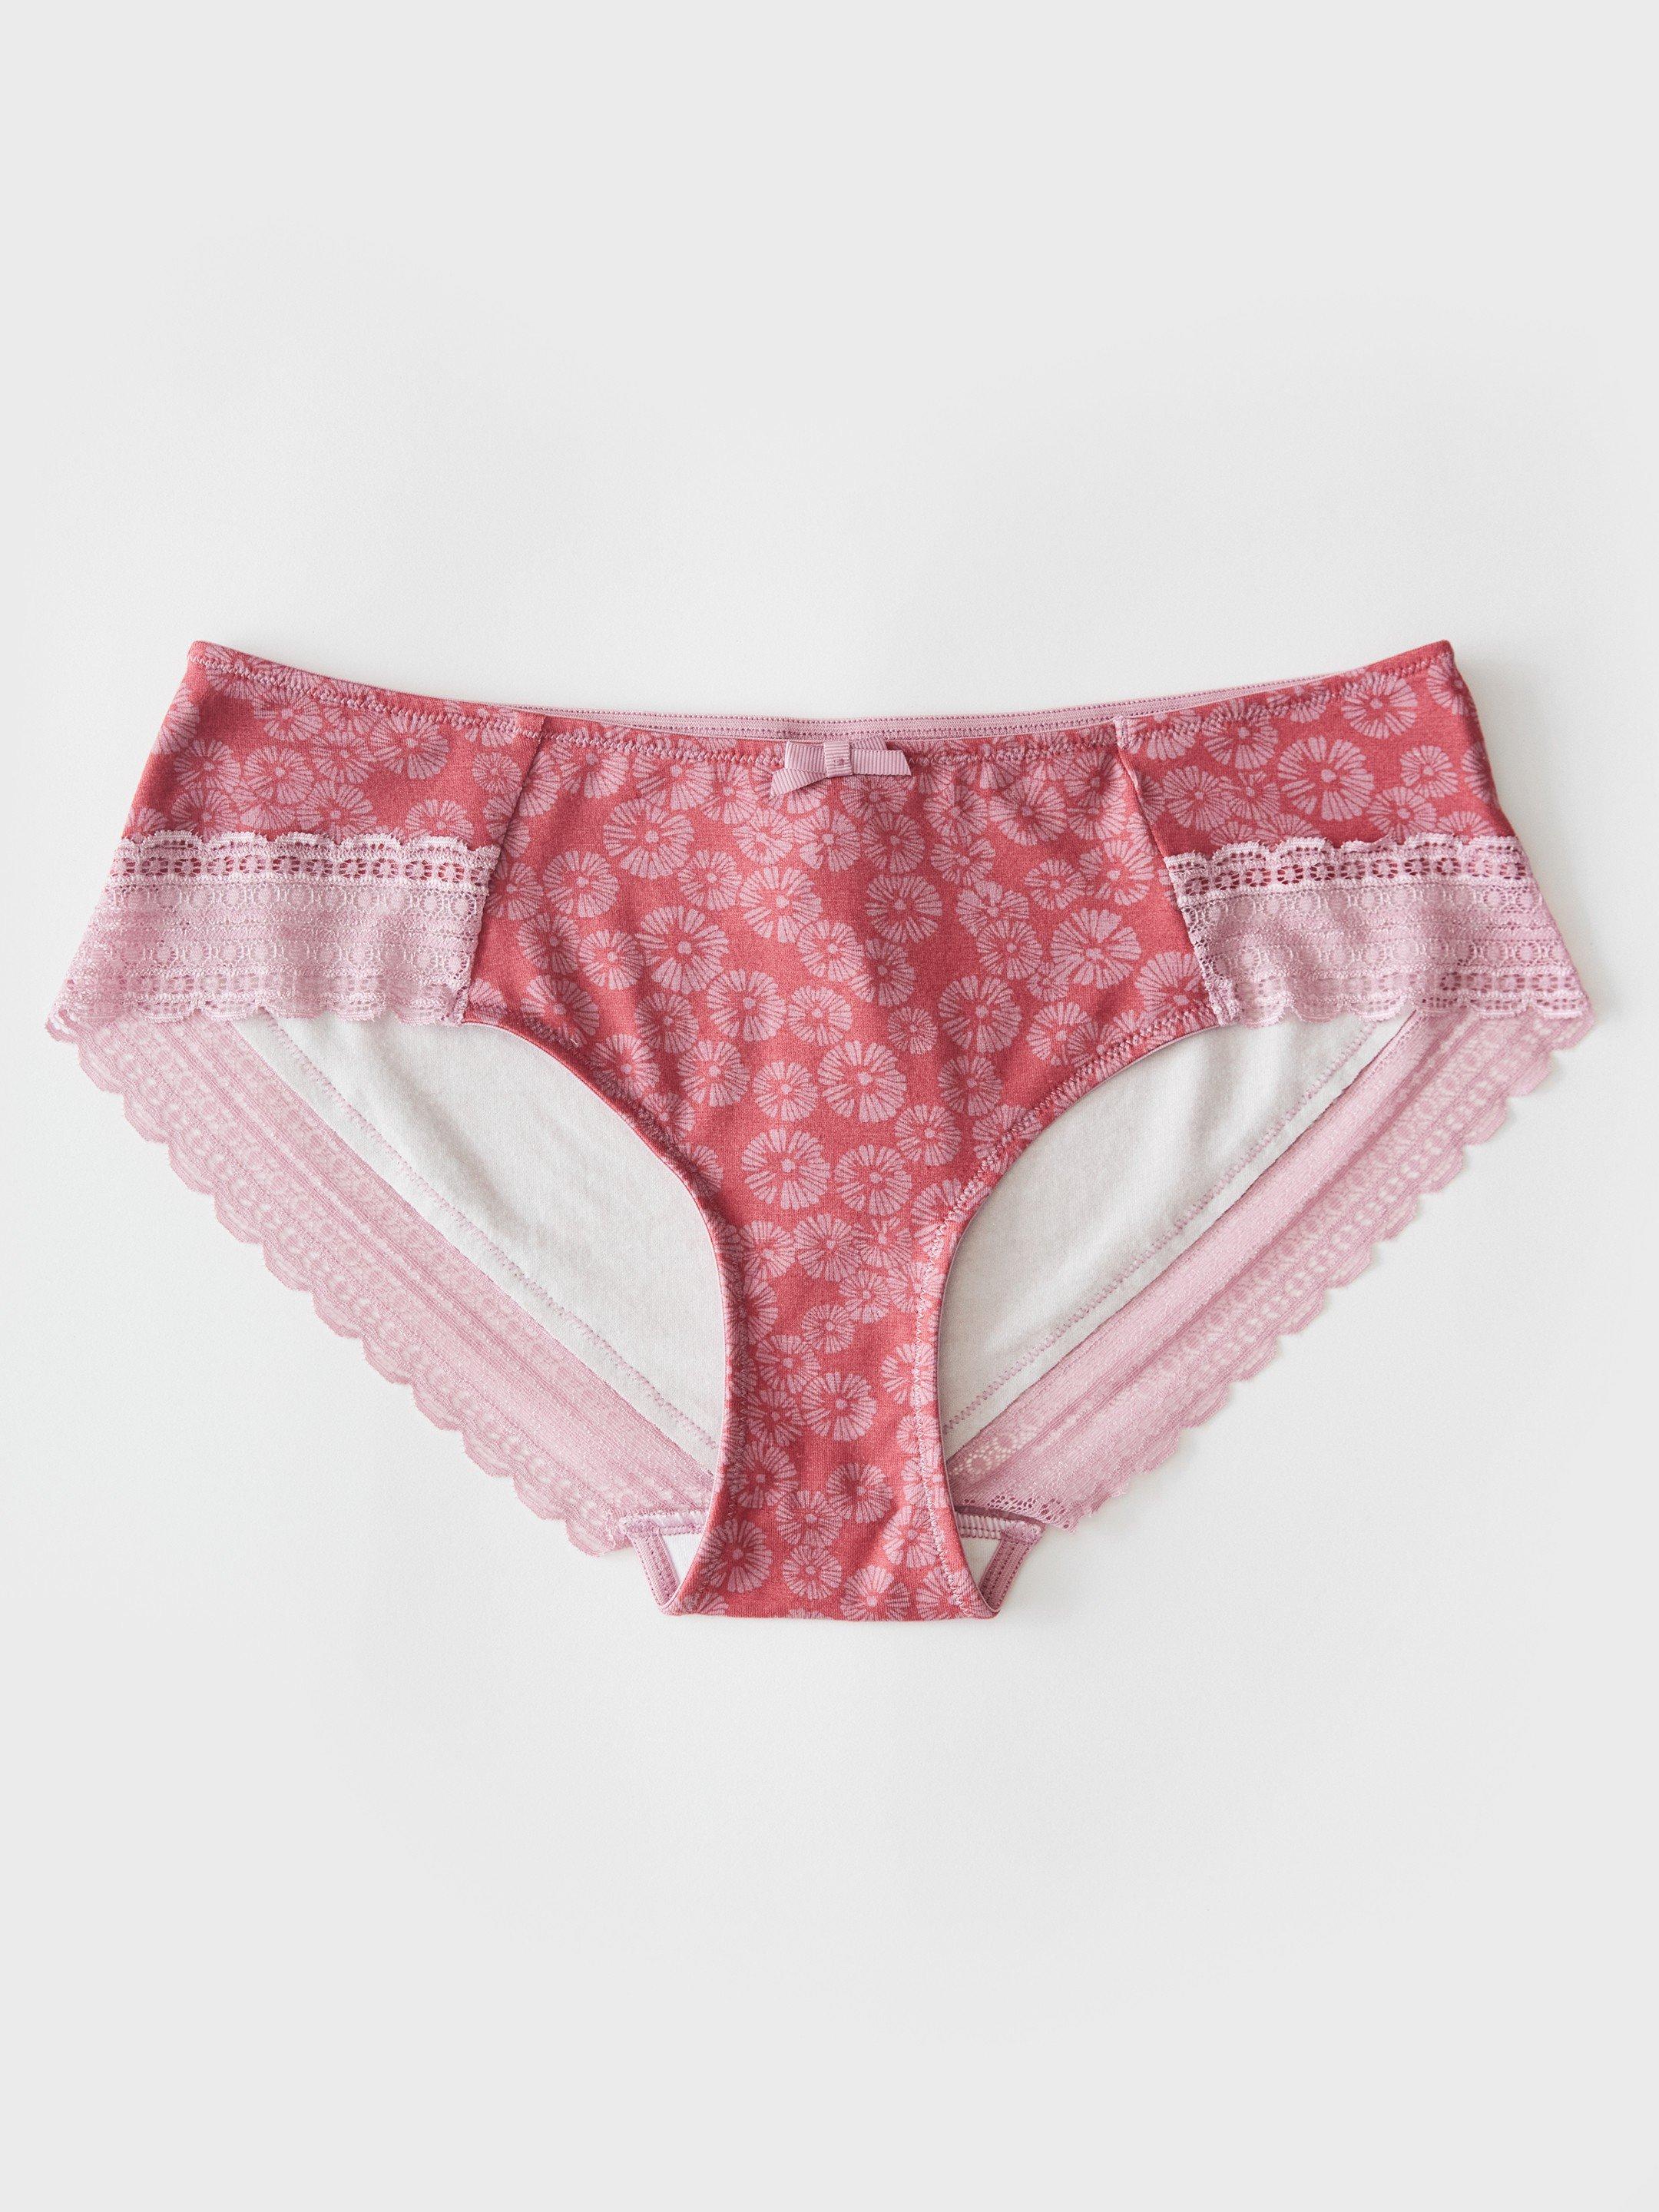 Ditsy Blooms Shortie in MID PINK - FLAT FRONT